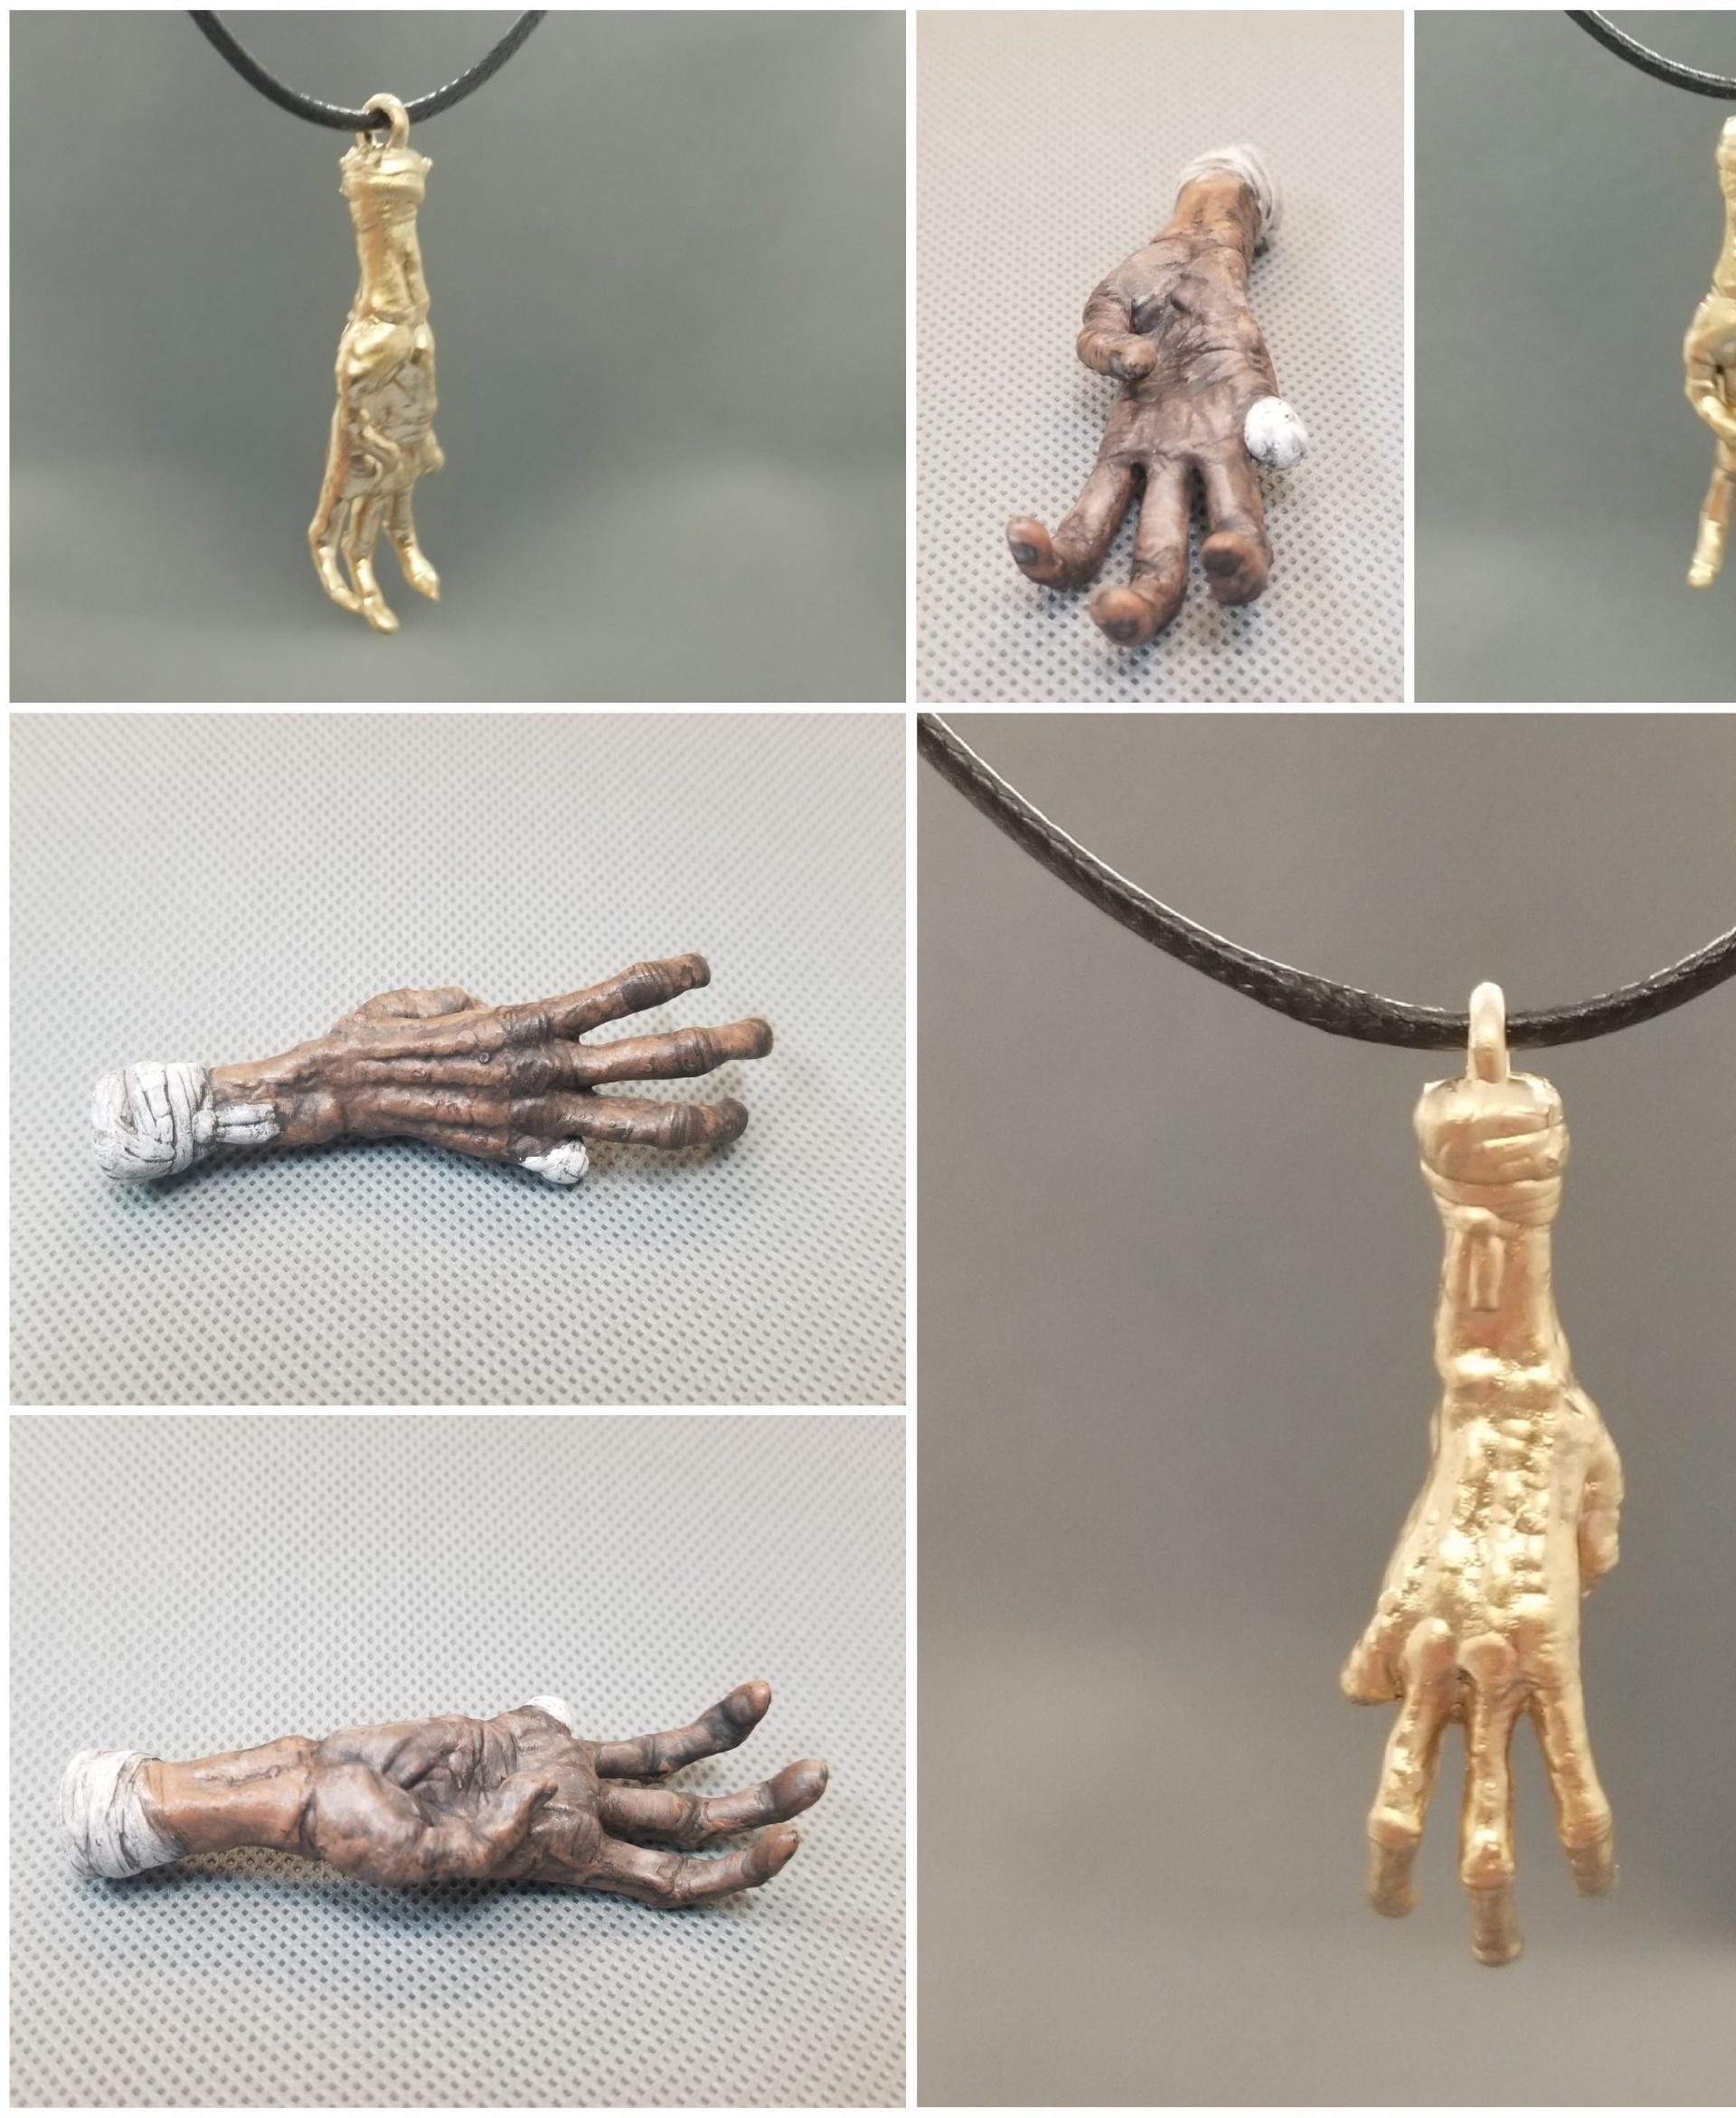 Cursed Monkey Paw Charm or Necklace 3d model